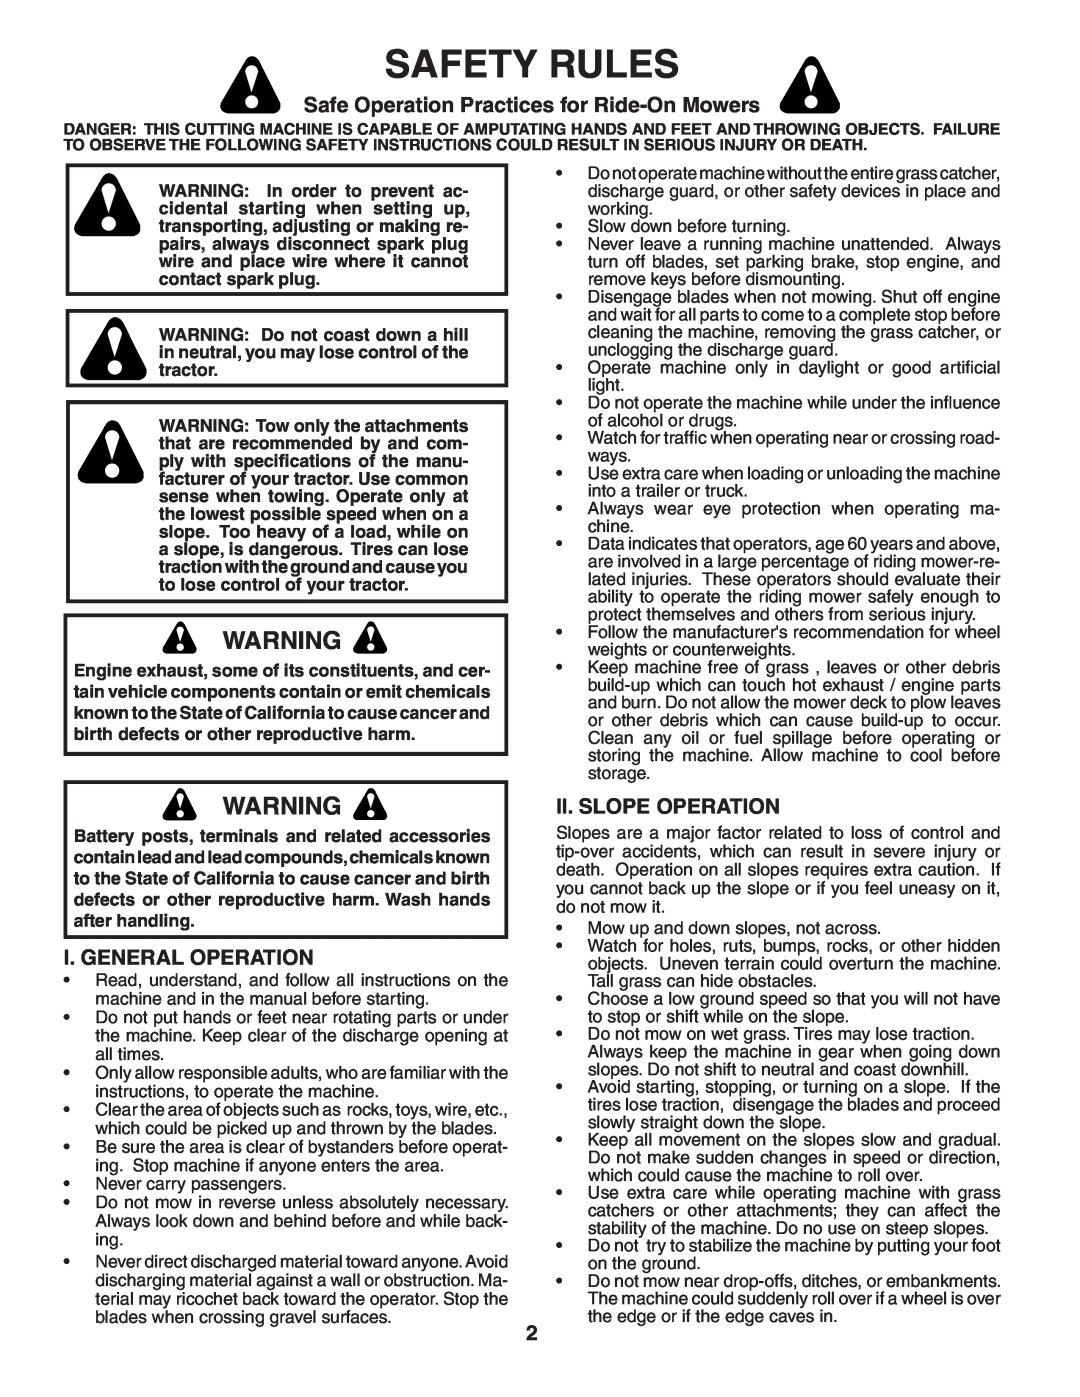 Poulan C20H42YT manual Safety Rules, Safe Operation Practices for Ride-OnMowers, I. General Operation, Ii. Slope Operation 